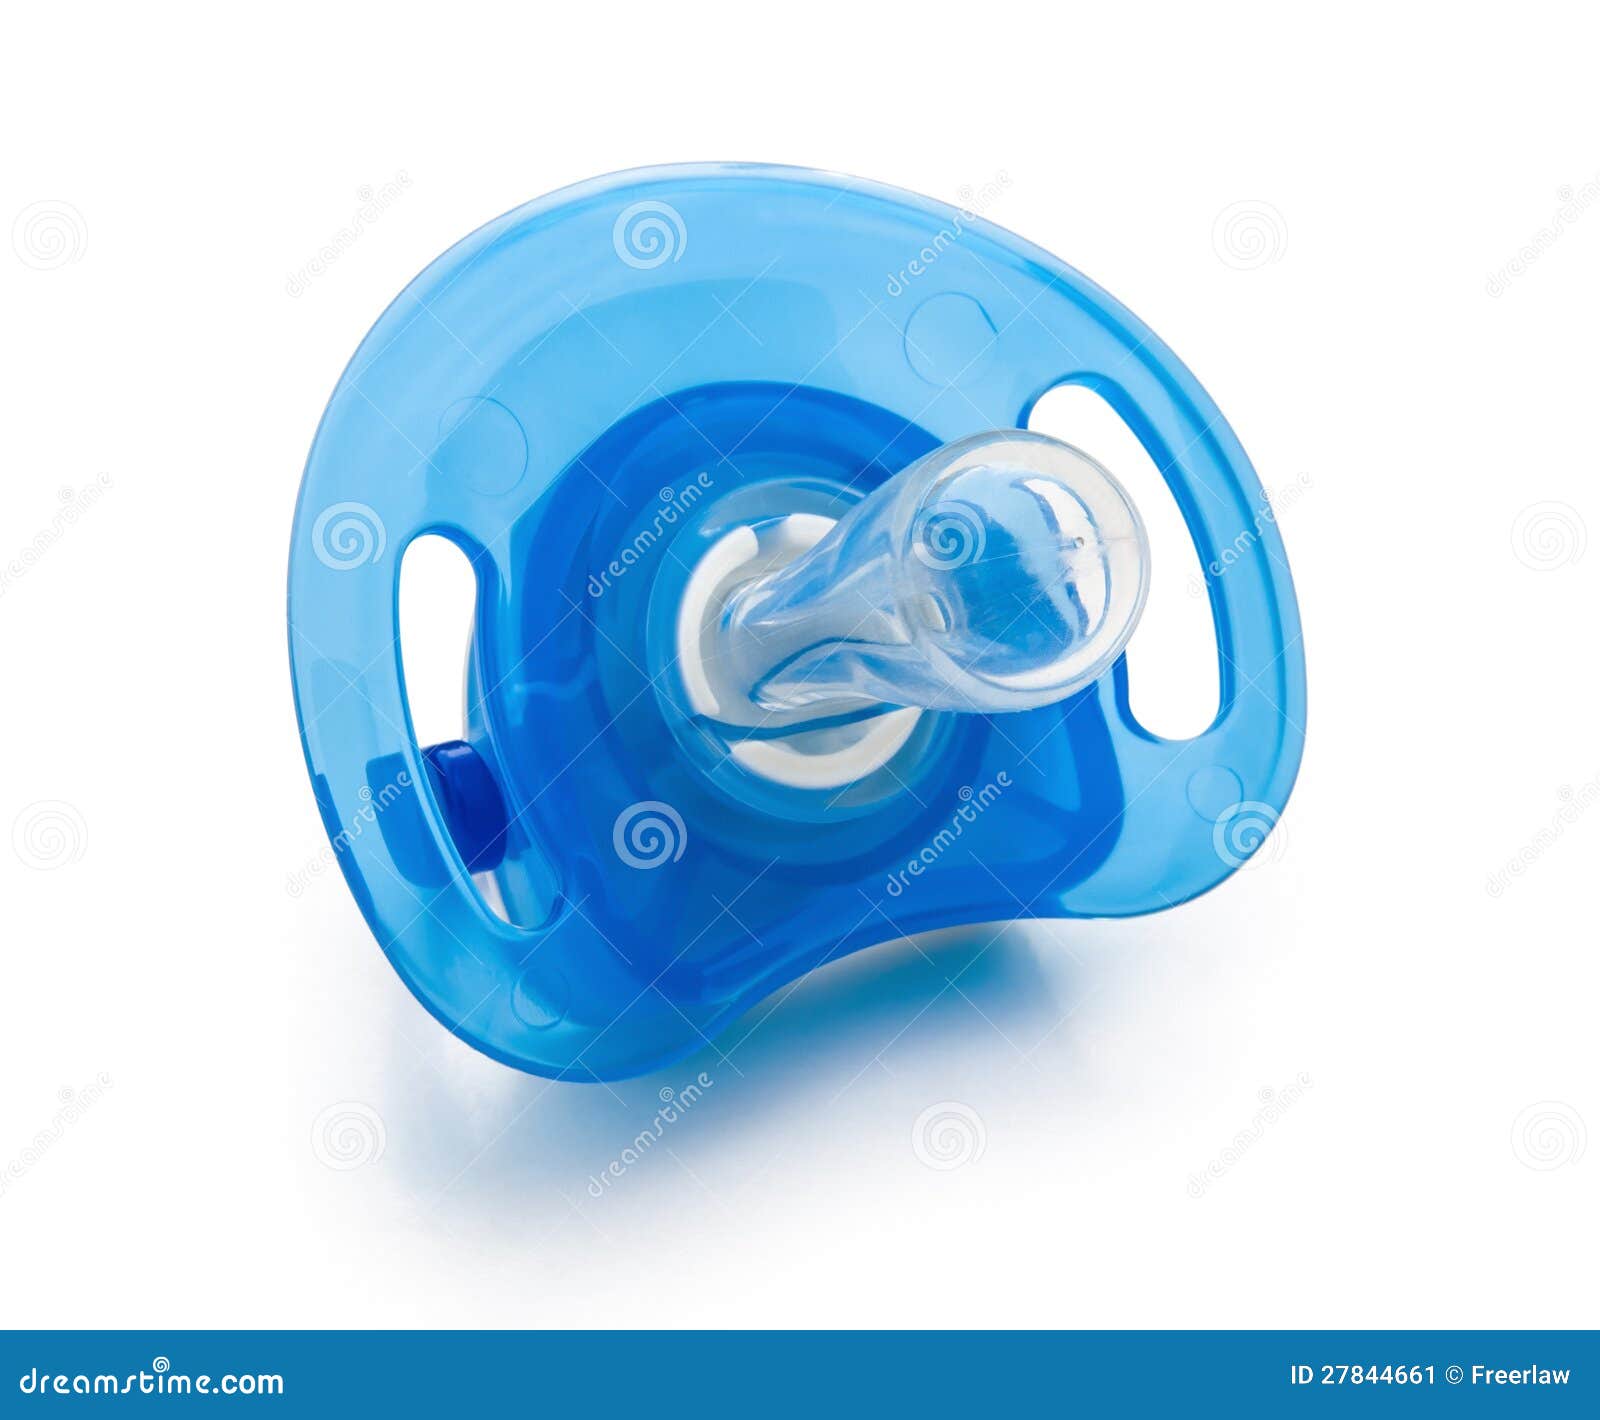 Blue pacifier isolated stock image. Image of isolated - 27844661